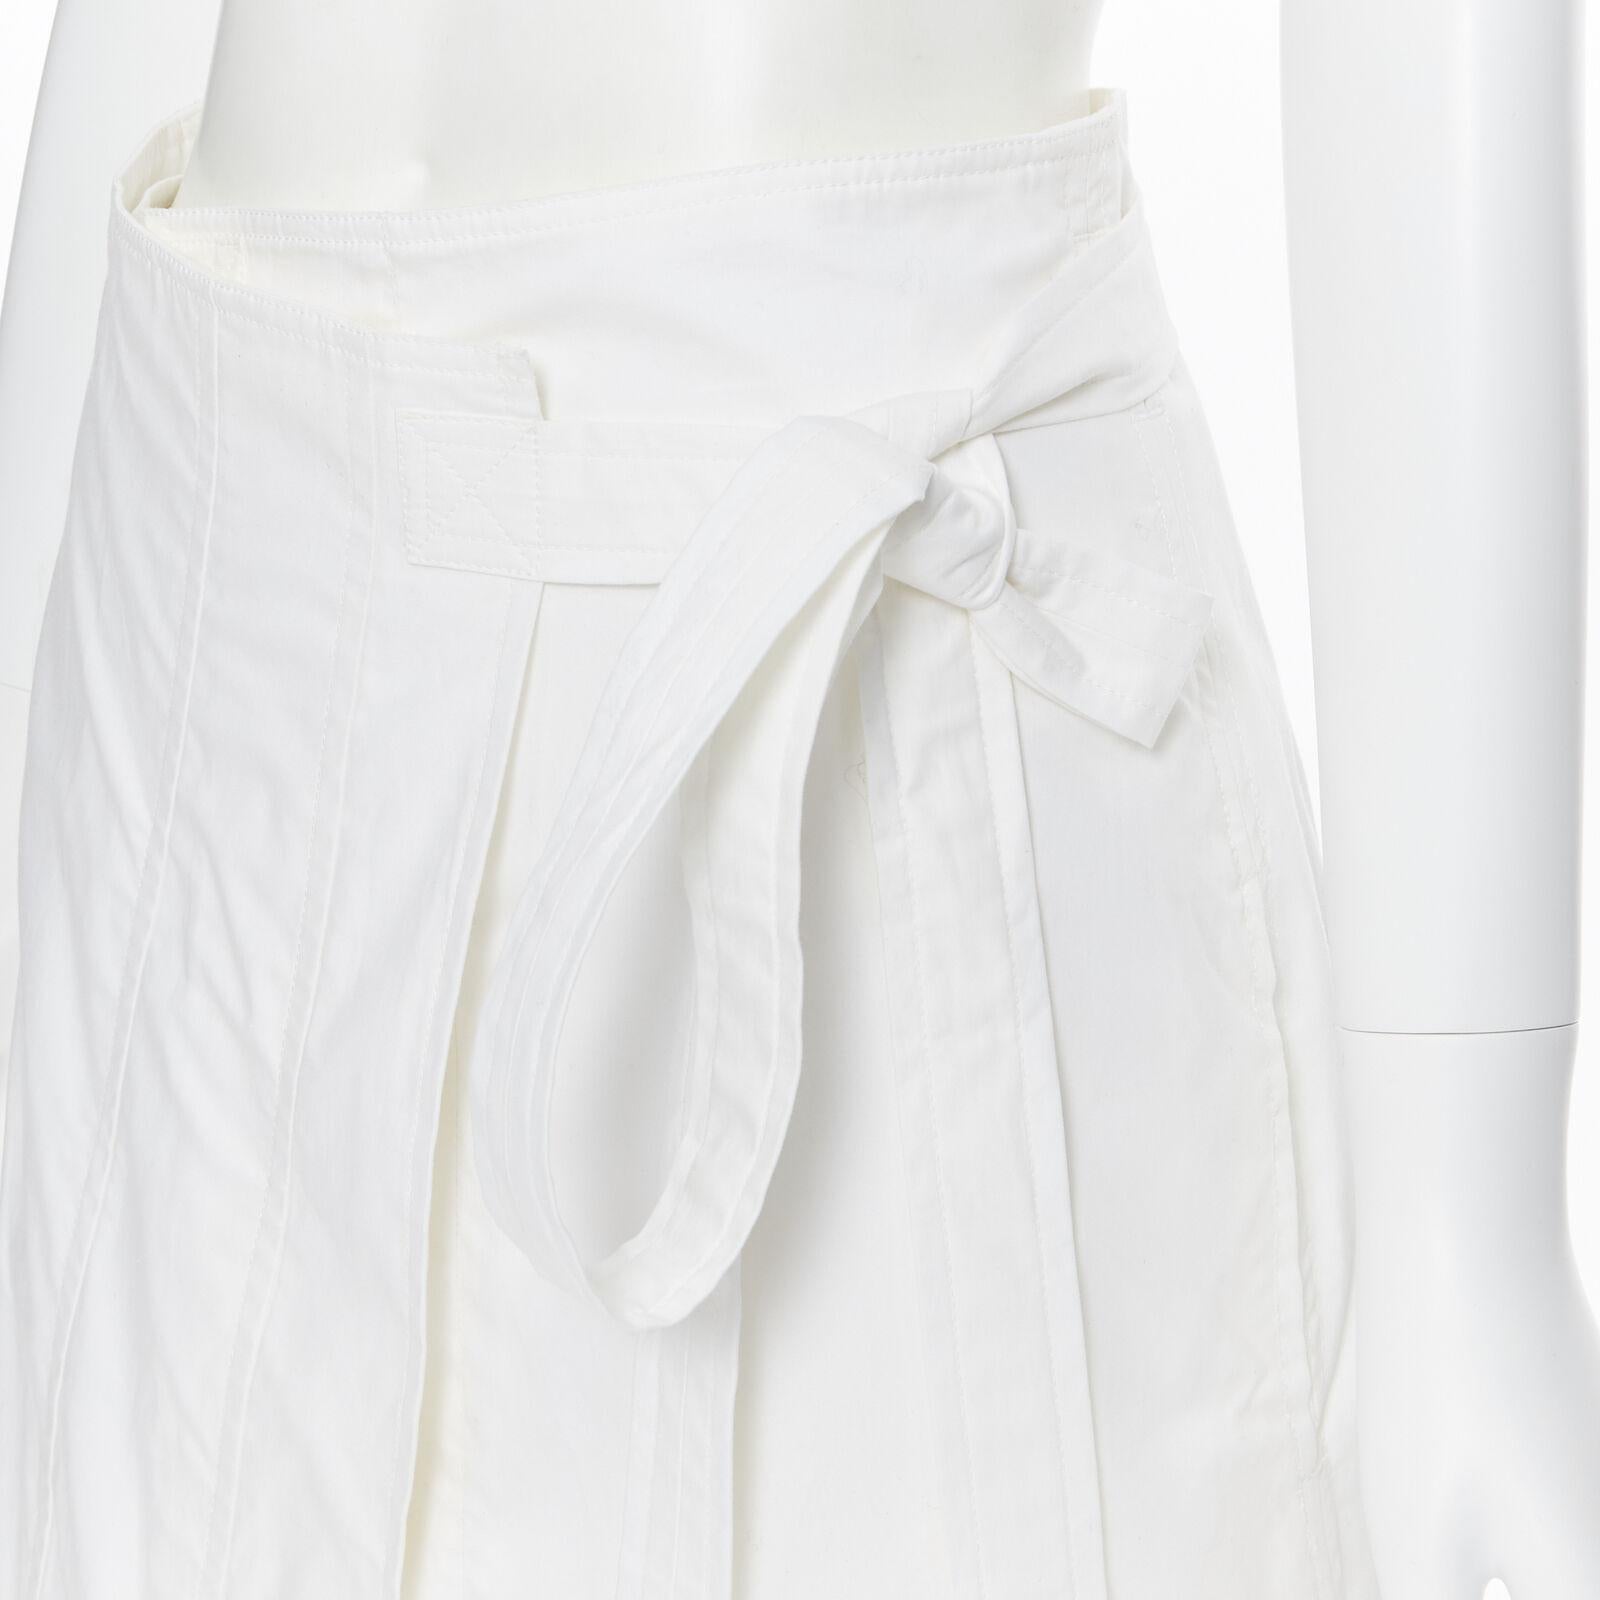 OLD CELINE Phoebe Philo white cotton wrap self tie darted midi skirt XS
Reference: SNKO/A00153
Brand: Celine
Designer: Phoebe Philo
Material: Others
Color: White
Pattern: Solid
Closure: Self Tie
Extra Details: Self tie belted waist. Darted hem. Wrap